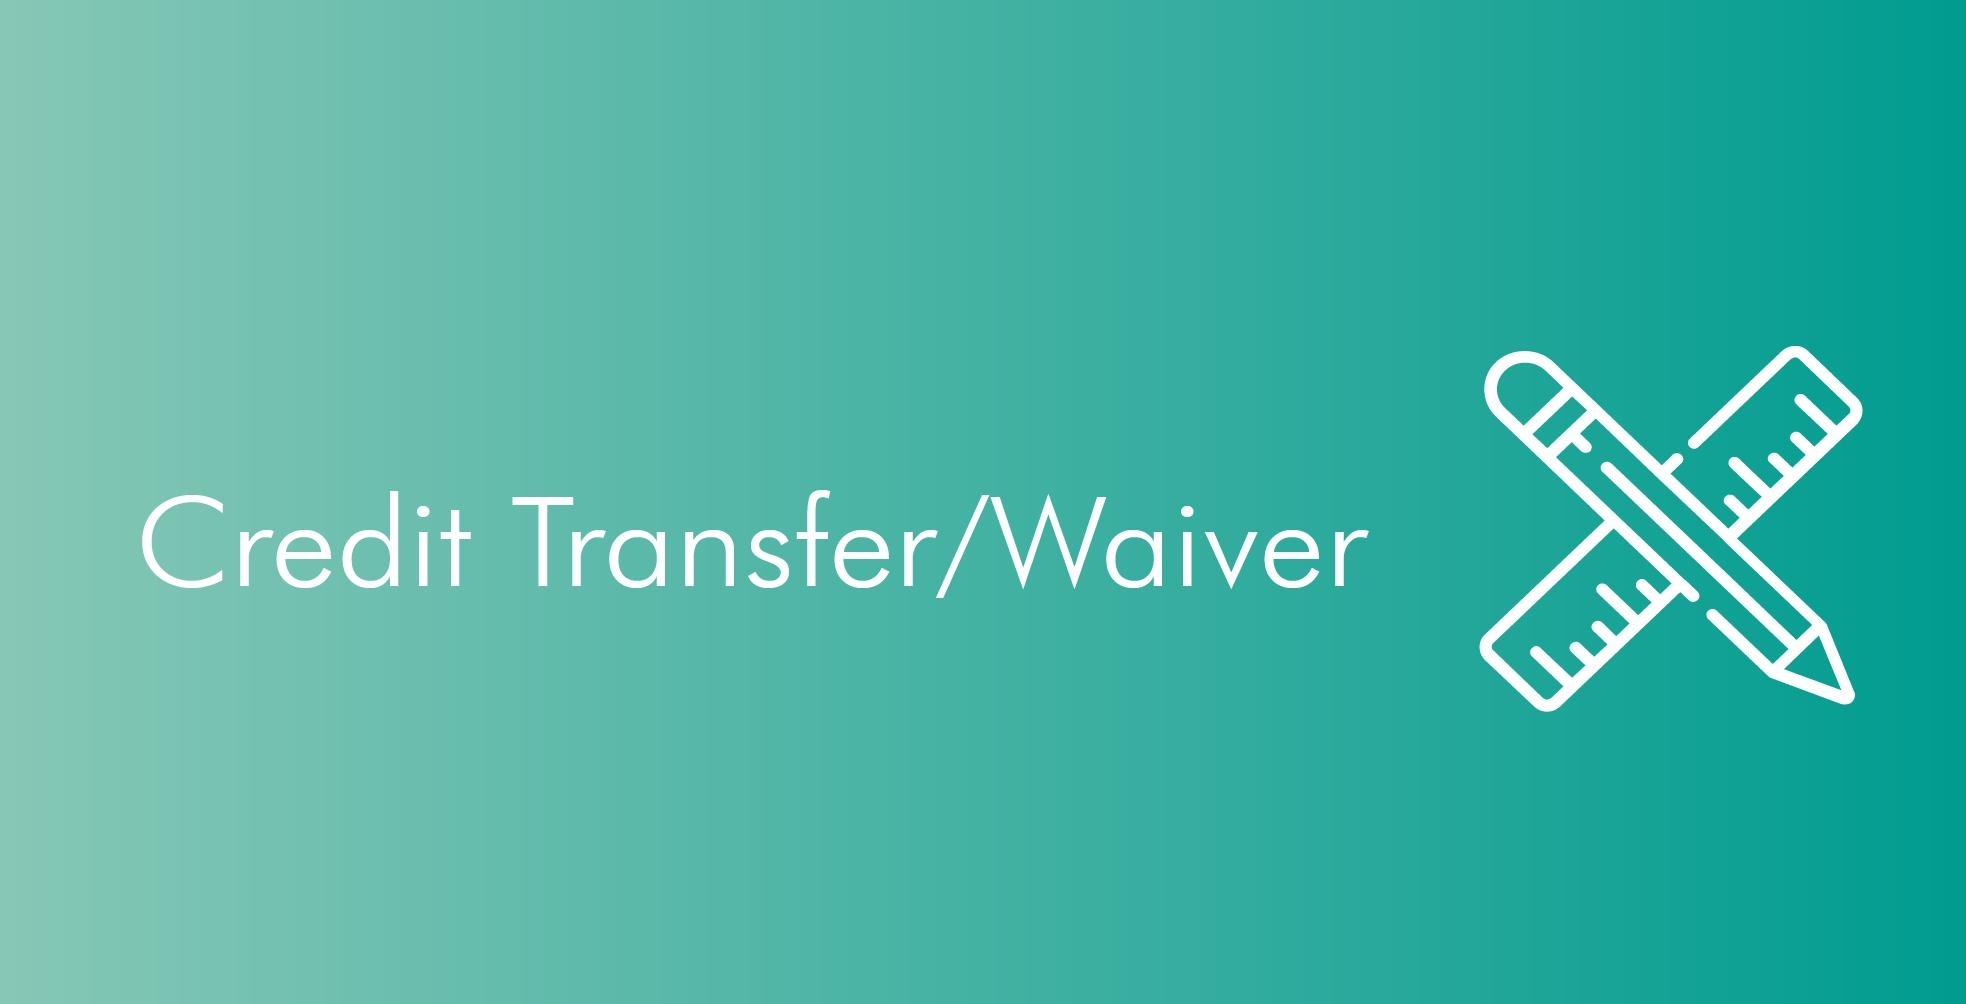 Credit Transfer/Waiver